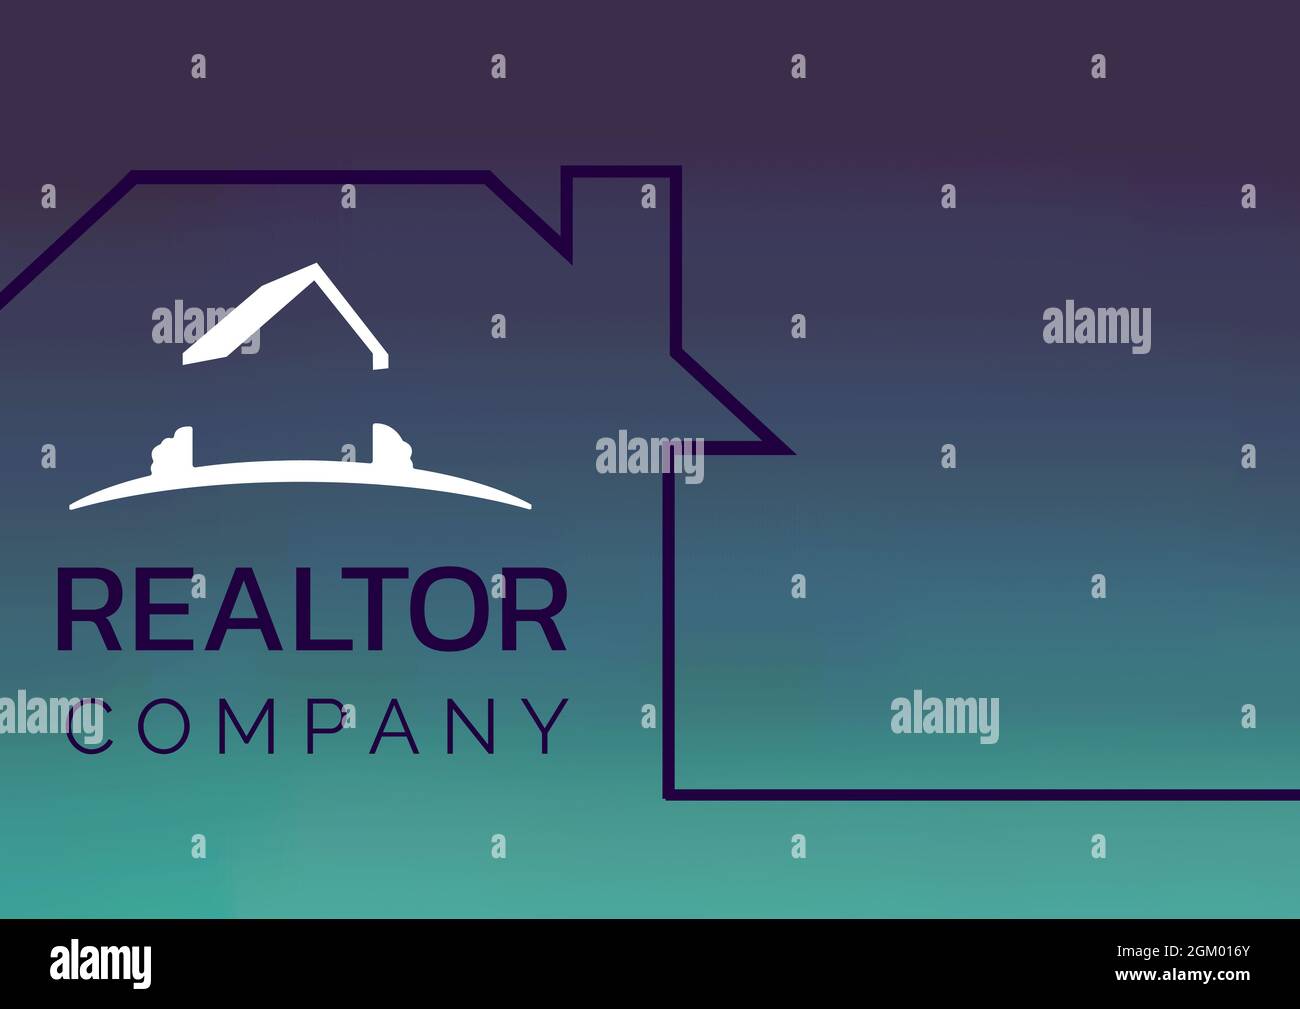 Realtor company text over a house icon against green gradient background Stock Photo